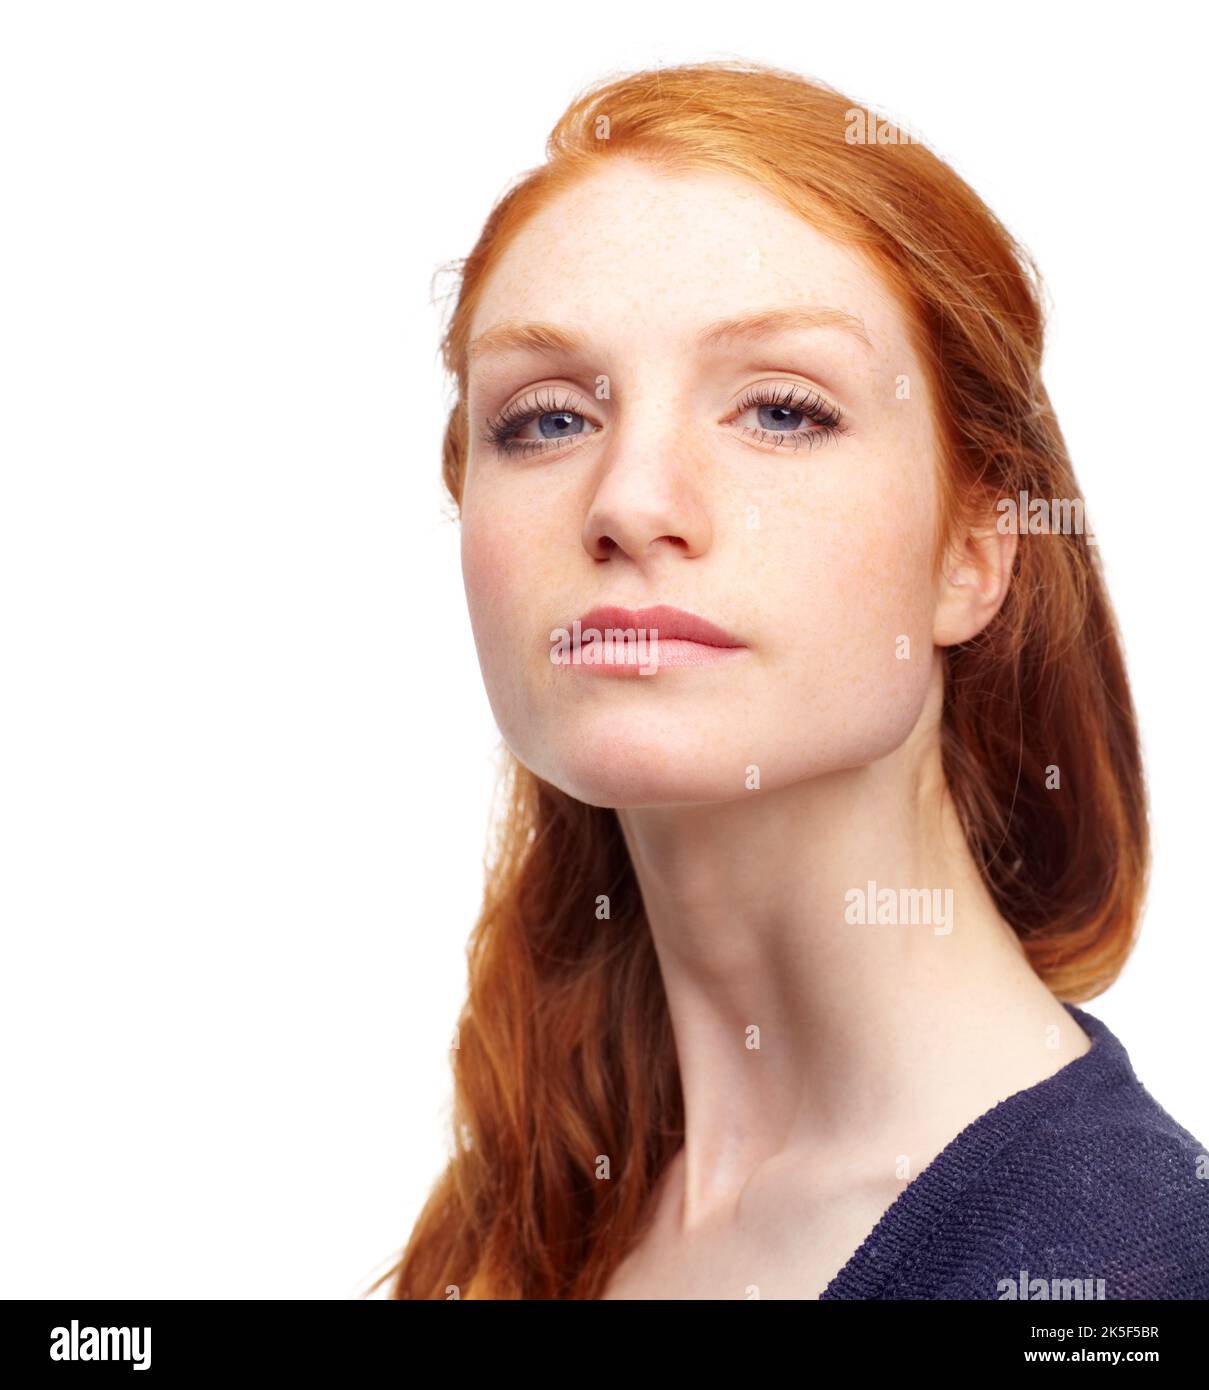 Nose in the air. Studio portrait of an attractive redhead isolated on white. Stock Photo